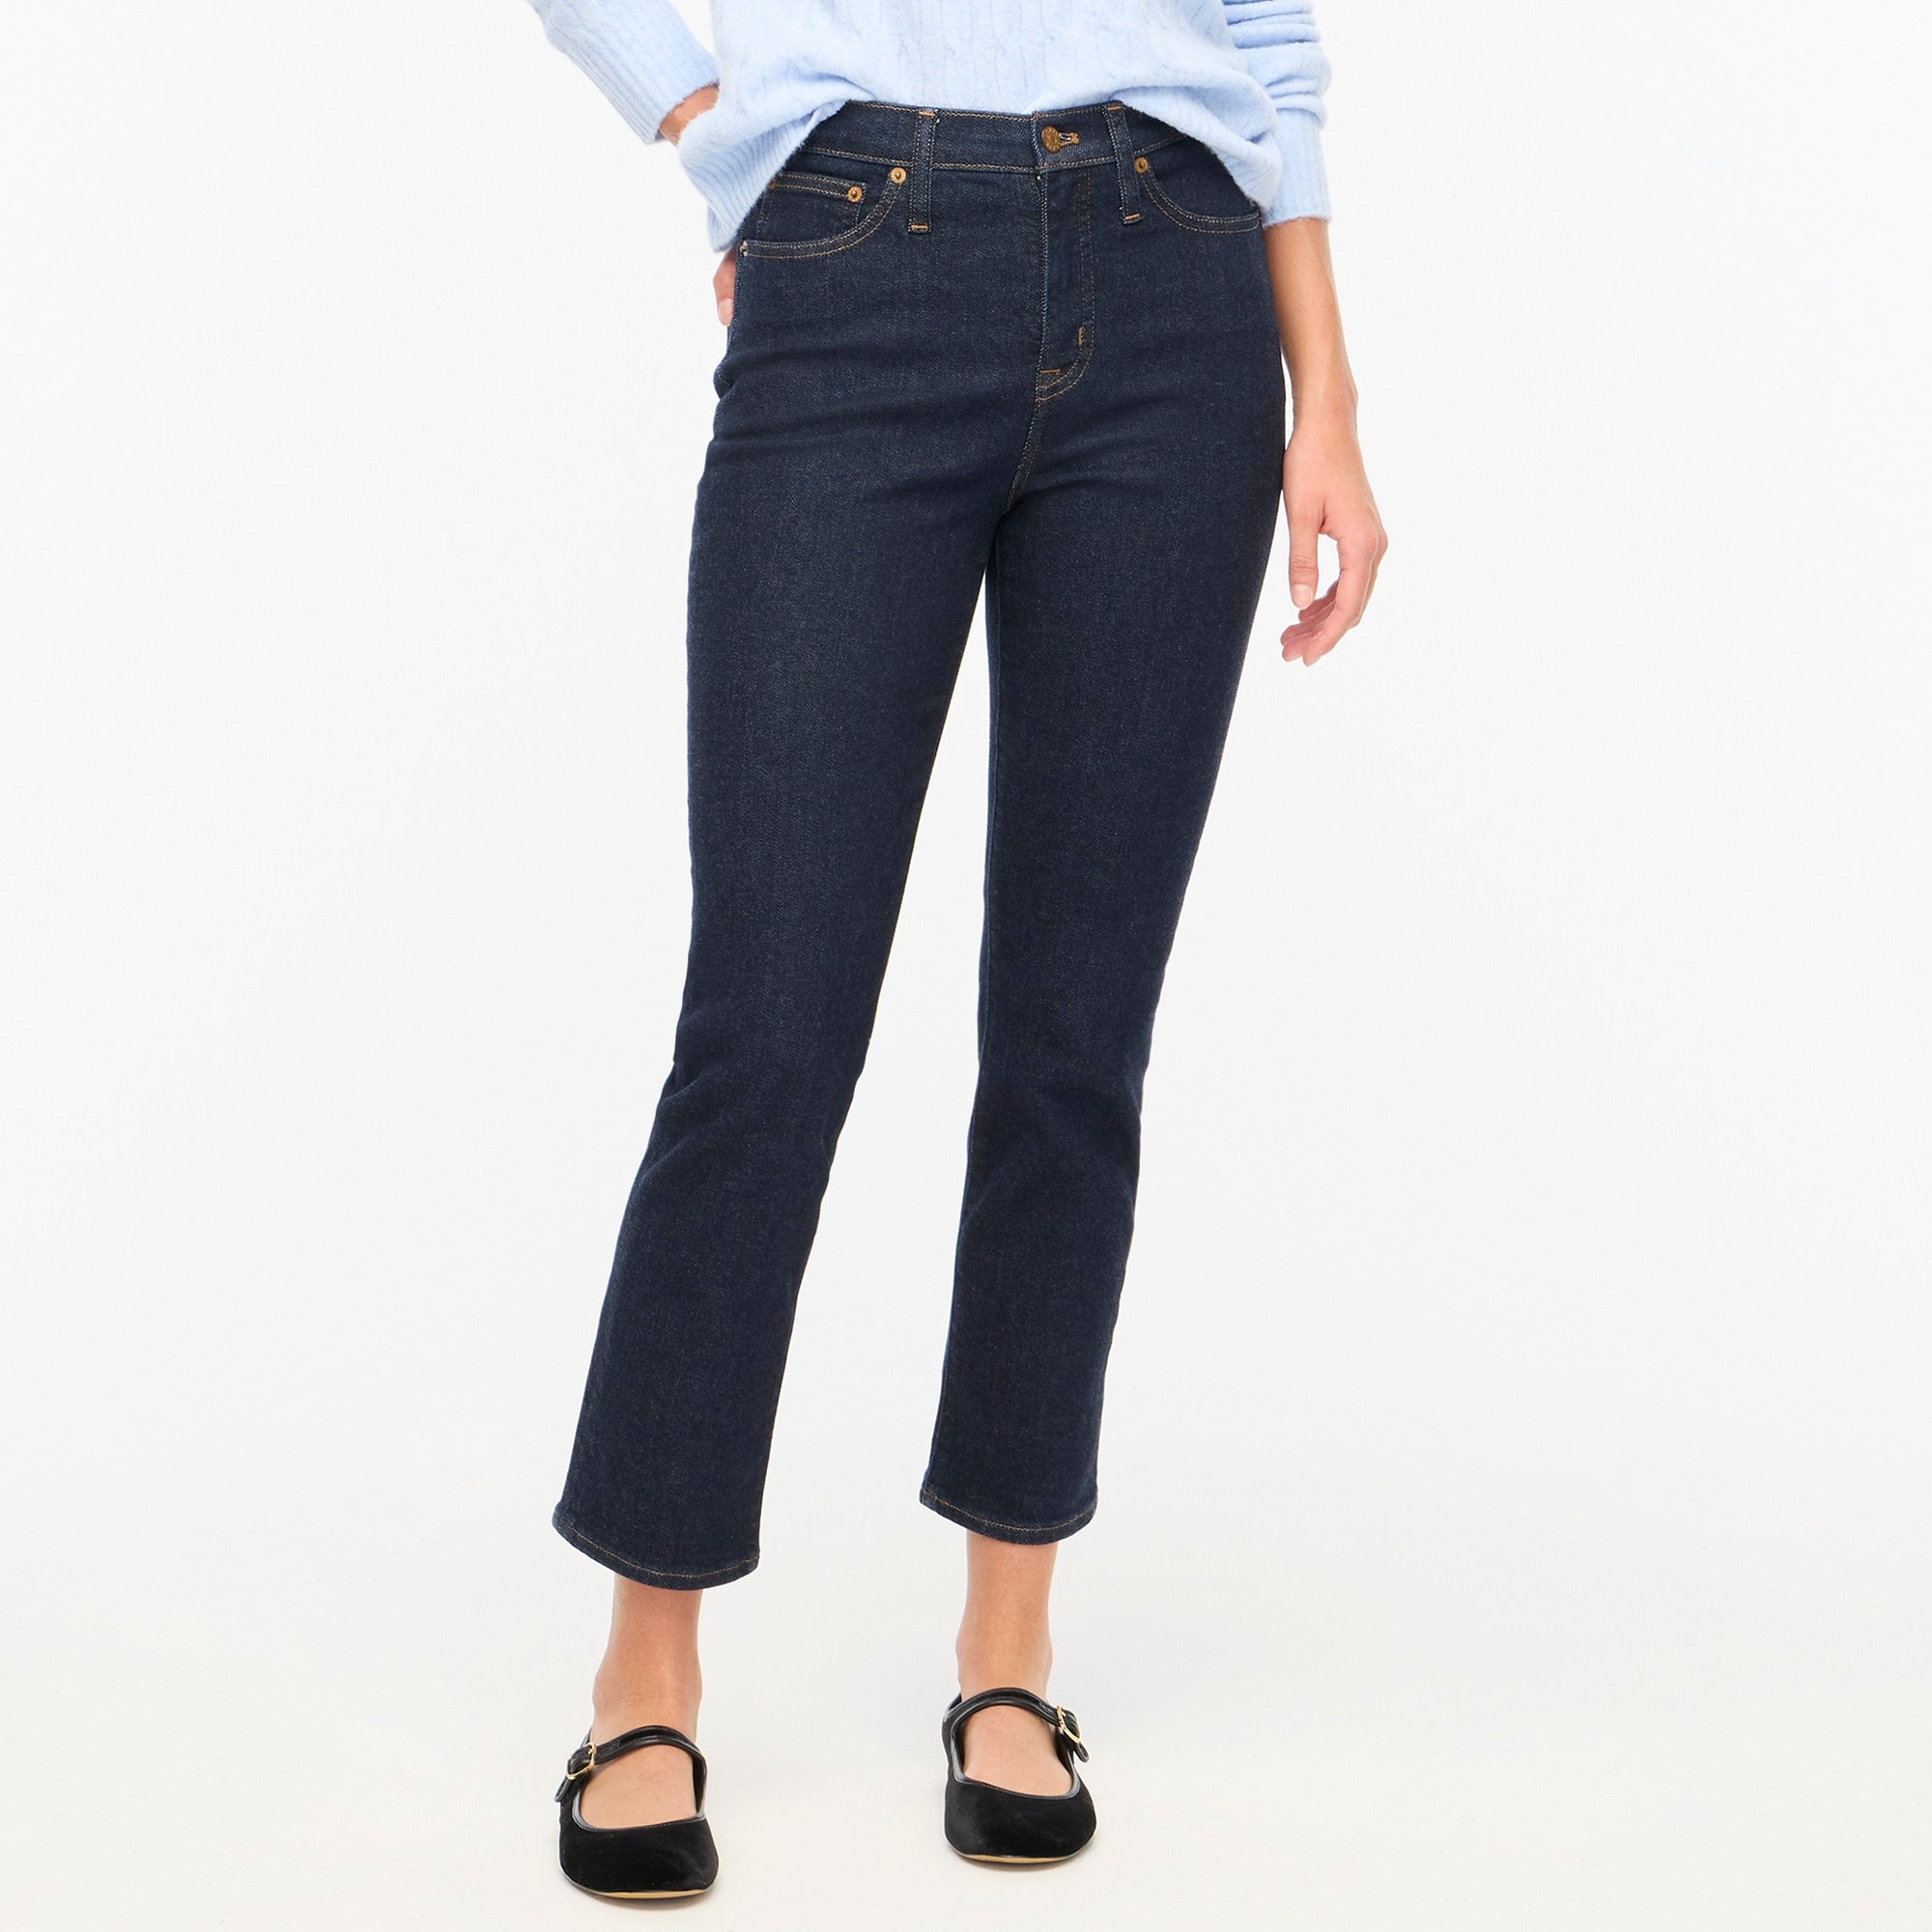 Jcrew Essential straight jean in all-day stretch